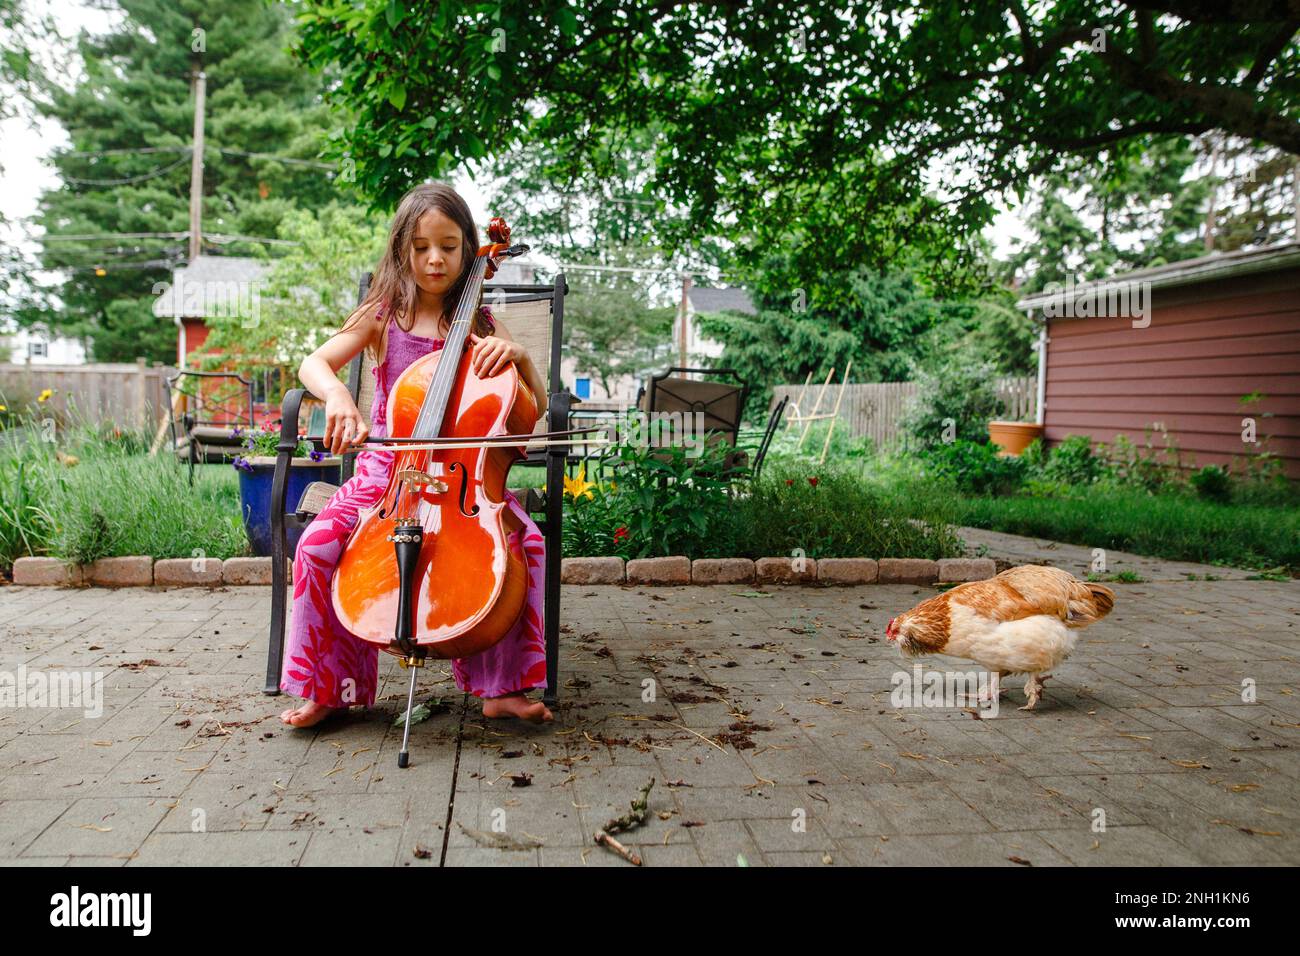 A small child plays cello for her pet chicken outside Stock Photo